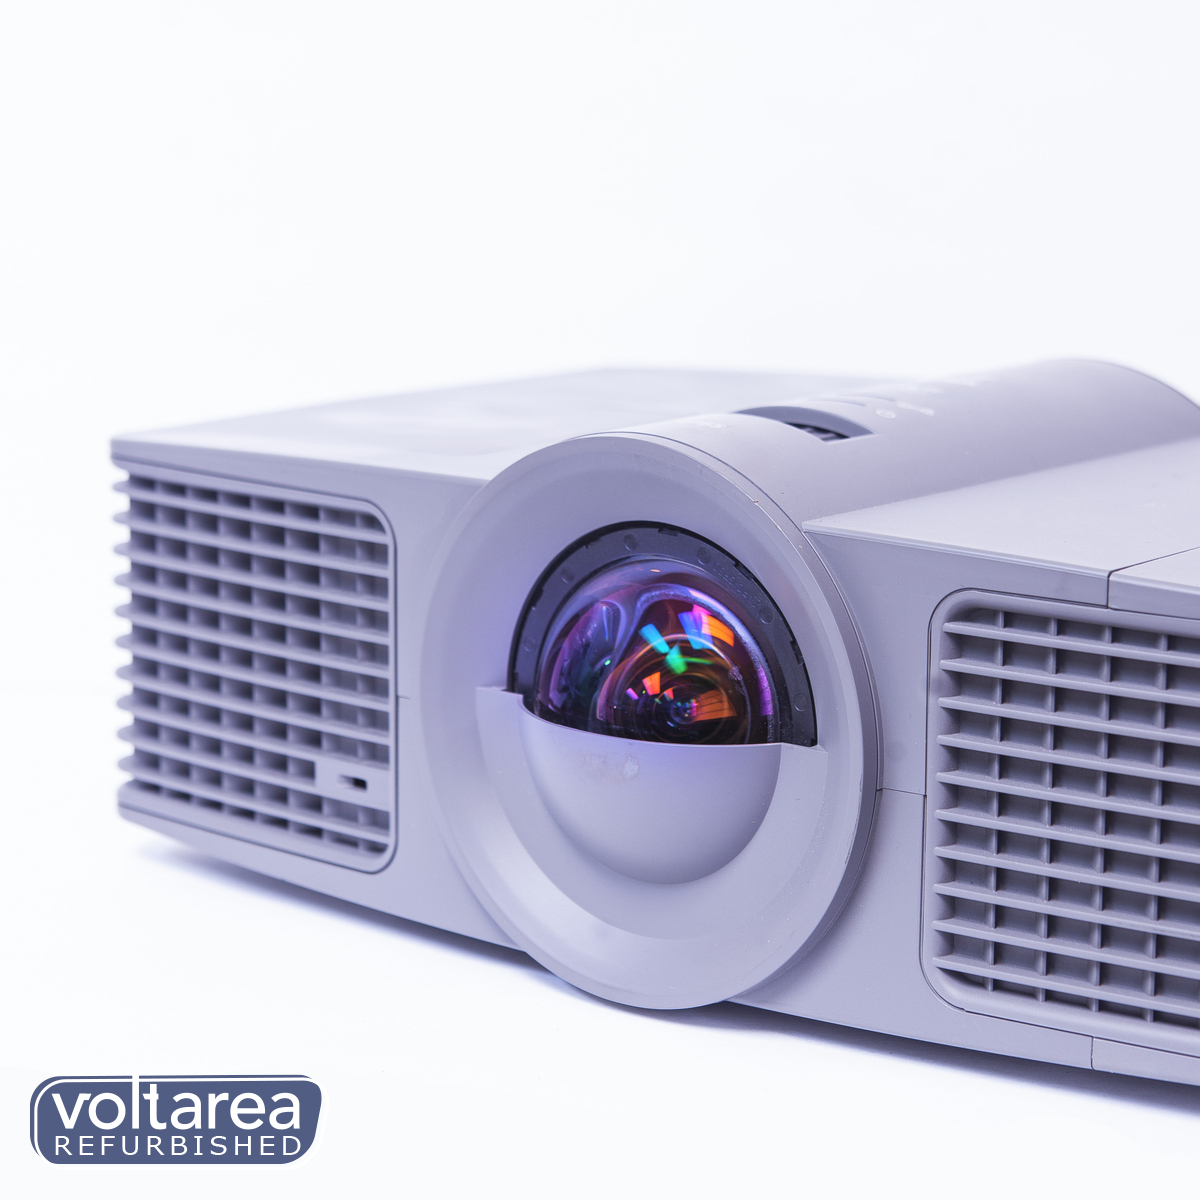 SMART UF65 Ultra Short-Throw Projector USED AS IS